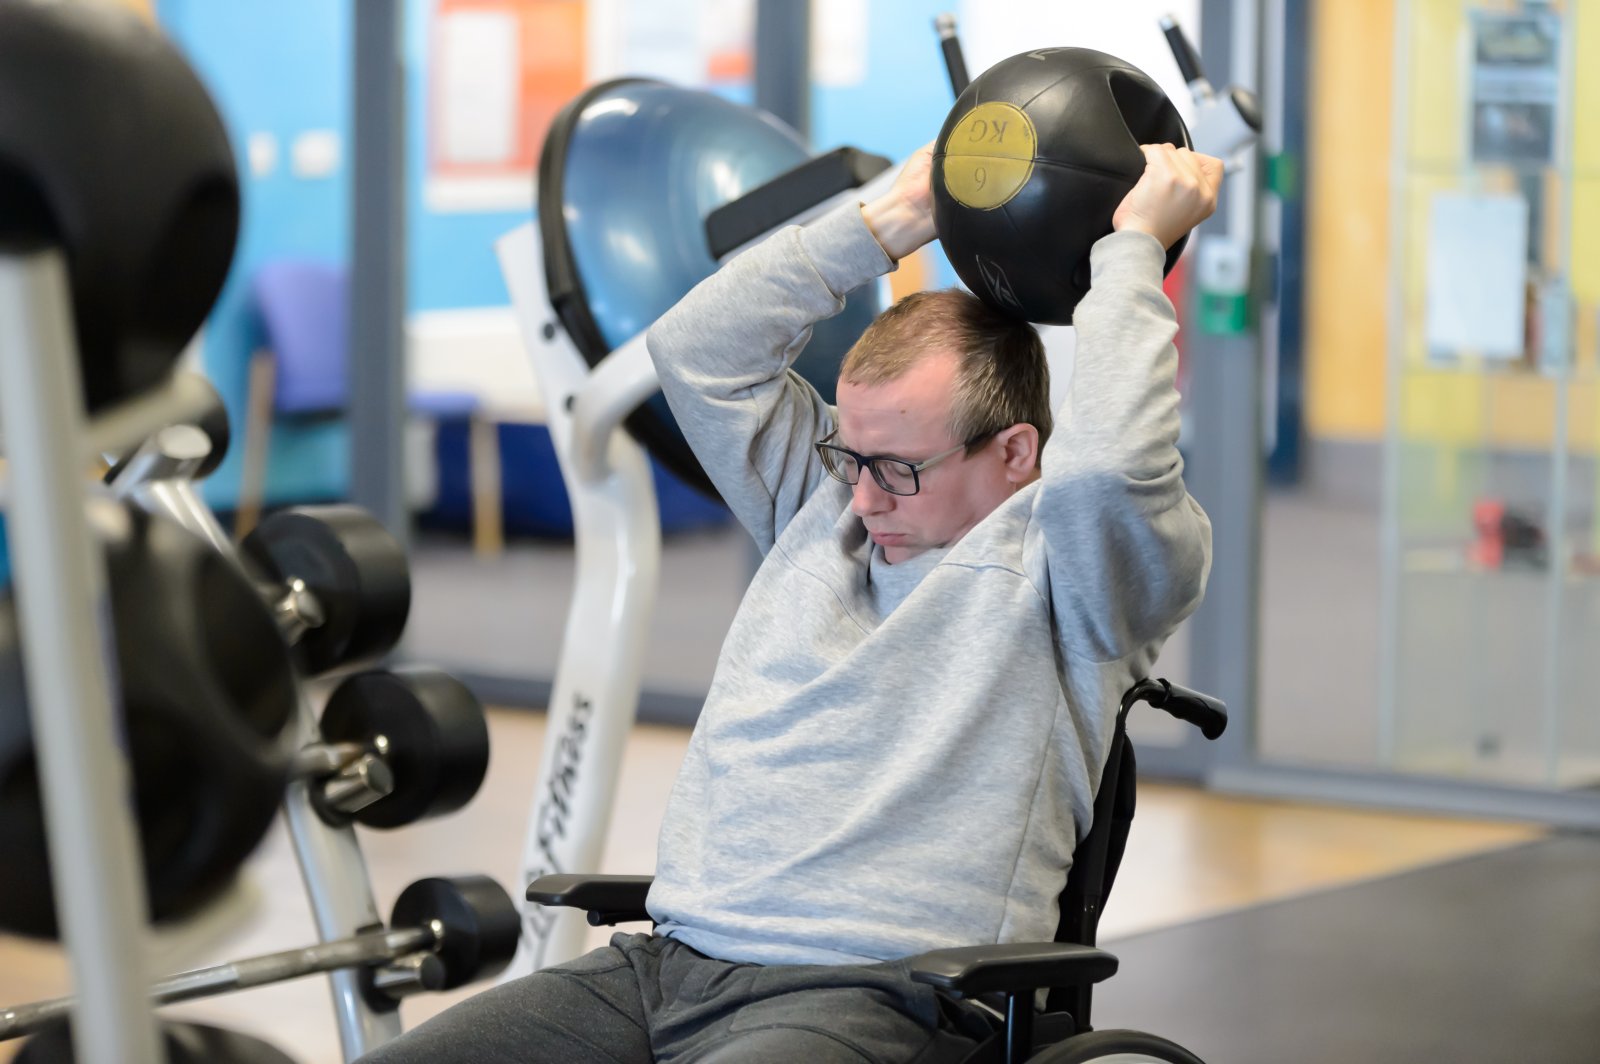 Find out more about disability sport